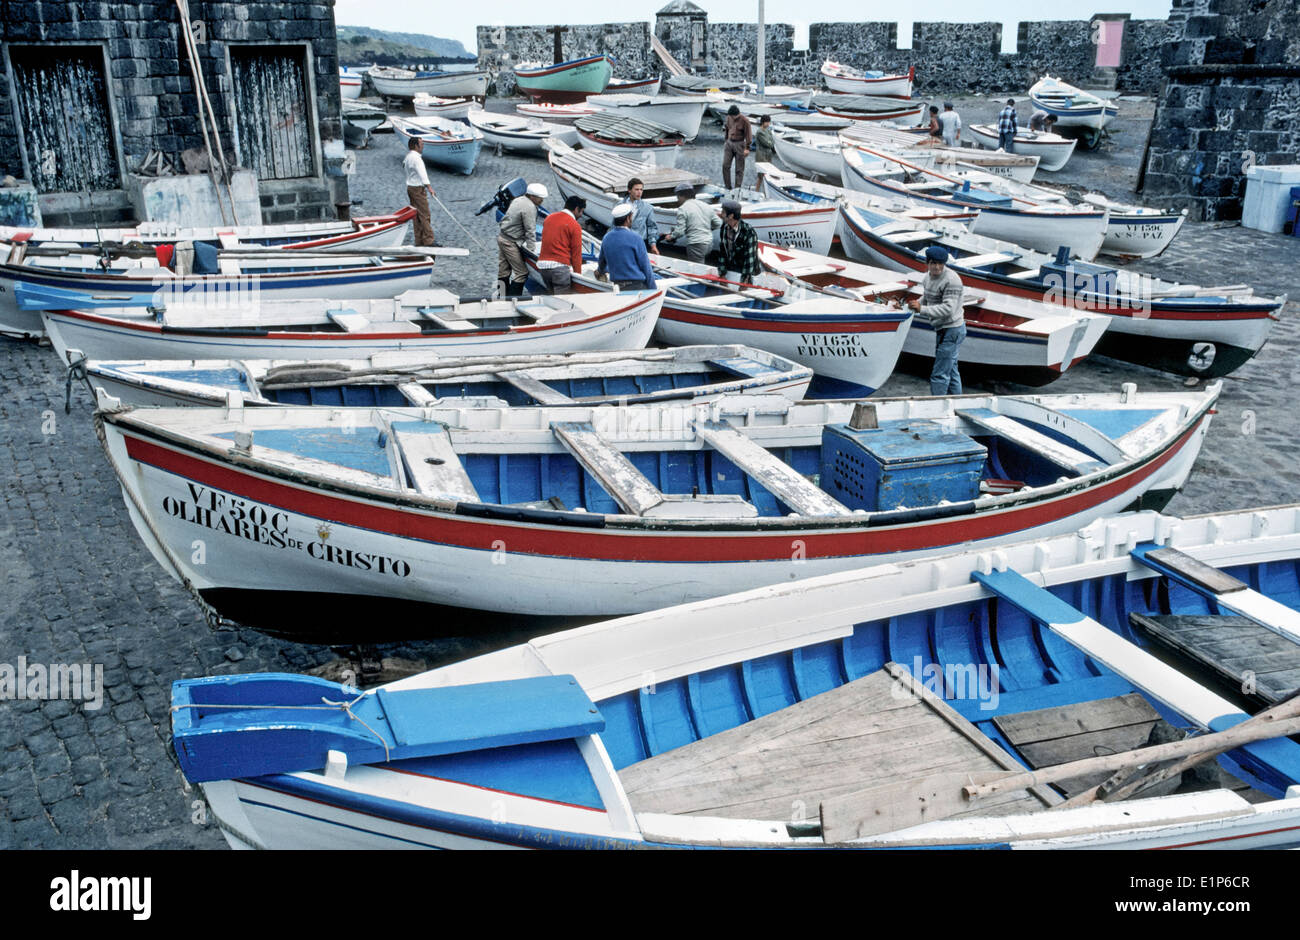 Fishermen prepare their boats at Vila Franca do Campo on Sao Miguel Island in the Azores, an autonomous region of Portugal in the North Atlantic Ocean. Stock Photo